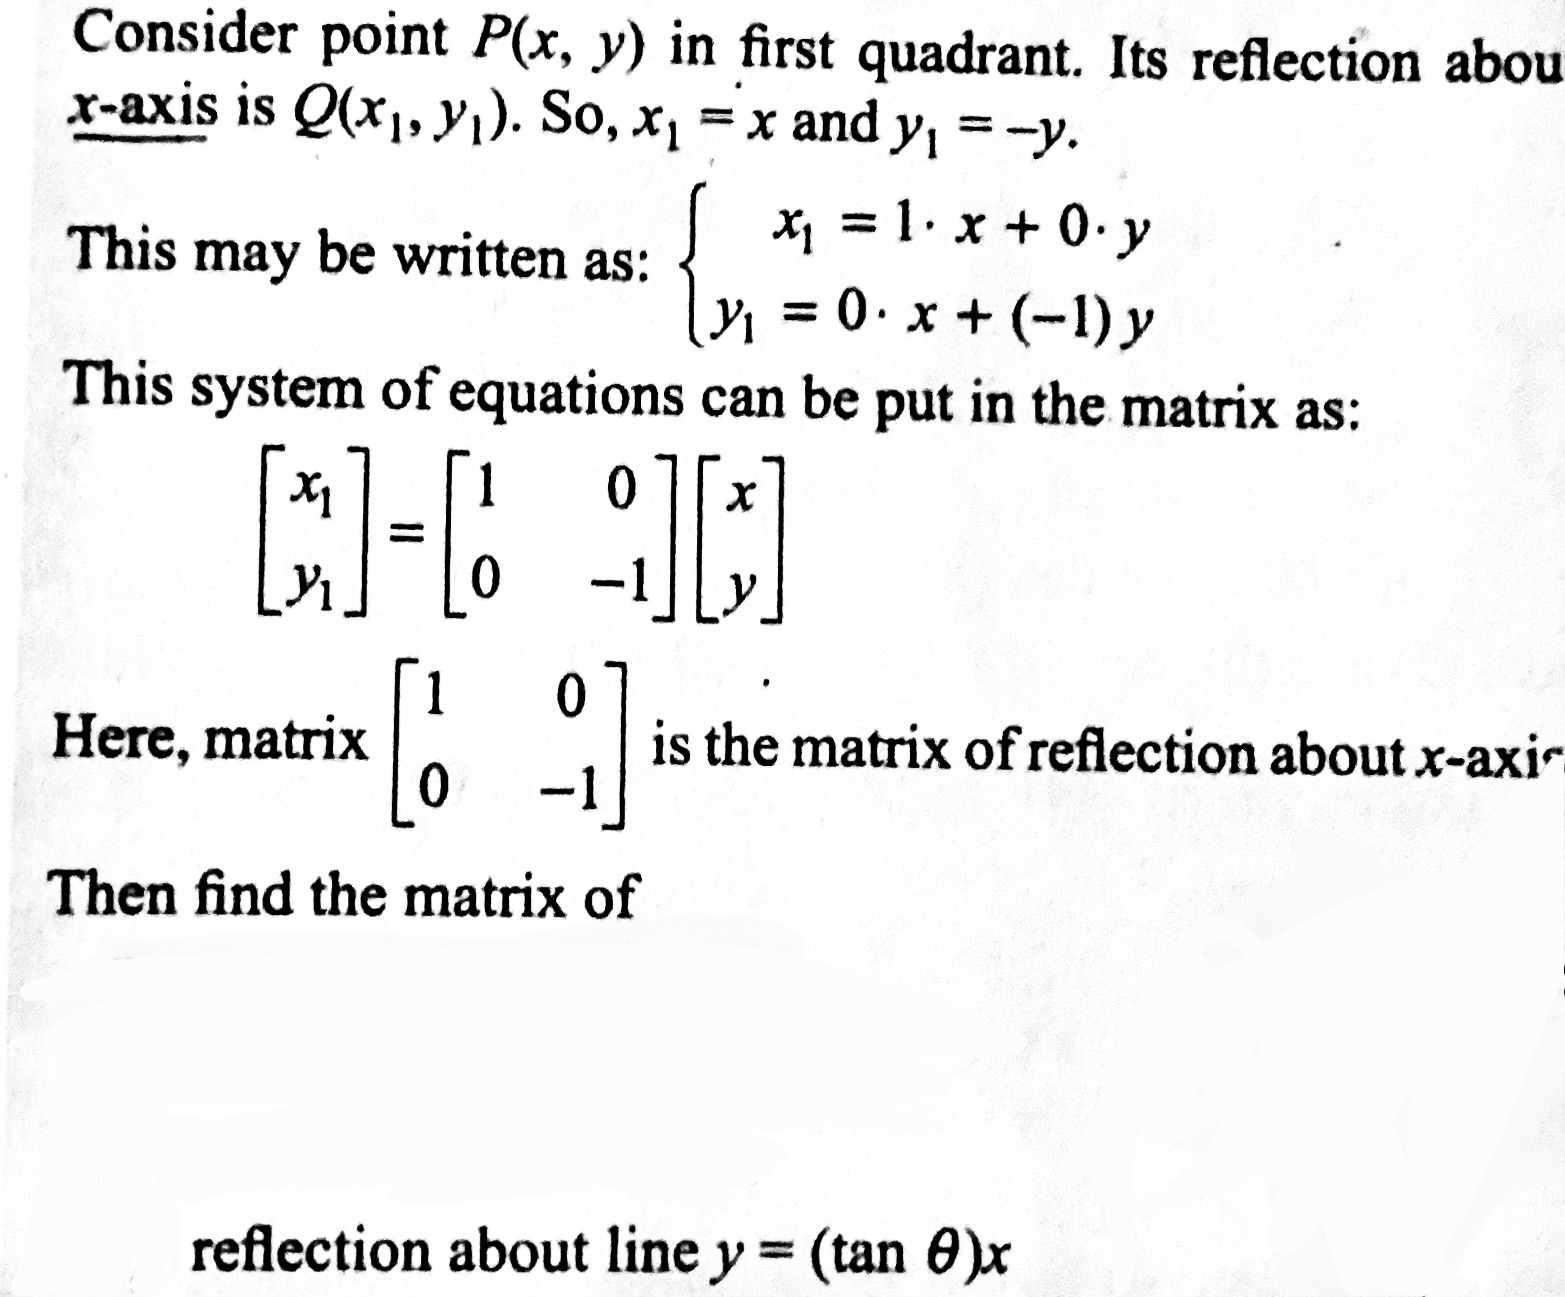 Consider point P(x,y) in first quadrant. Its reflection abou x-axis is